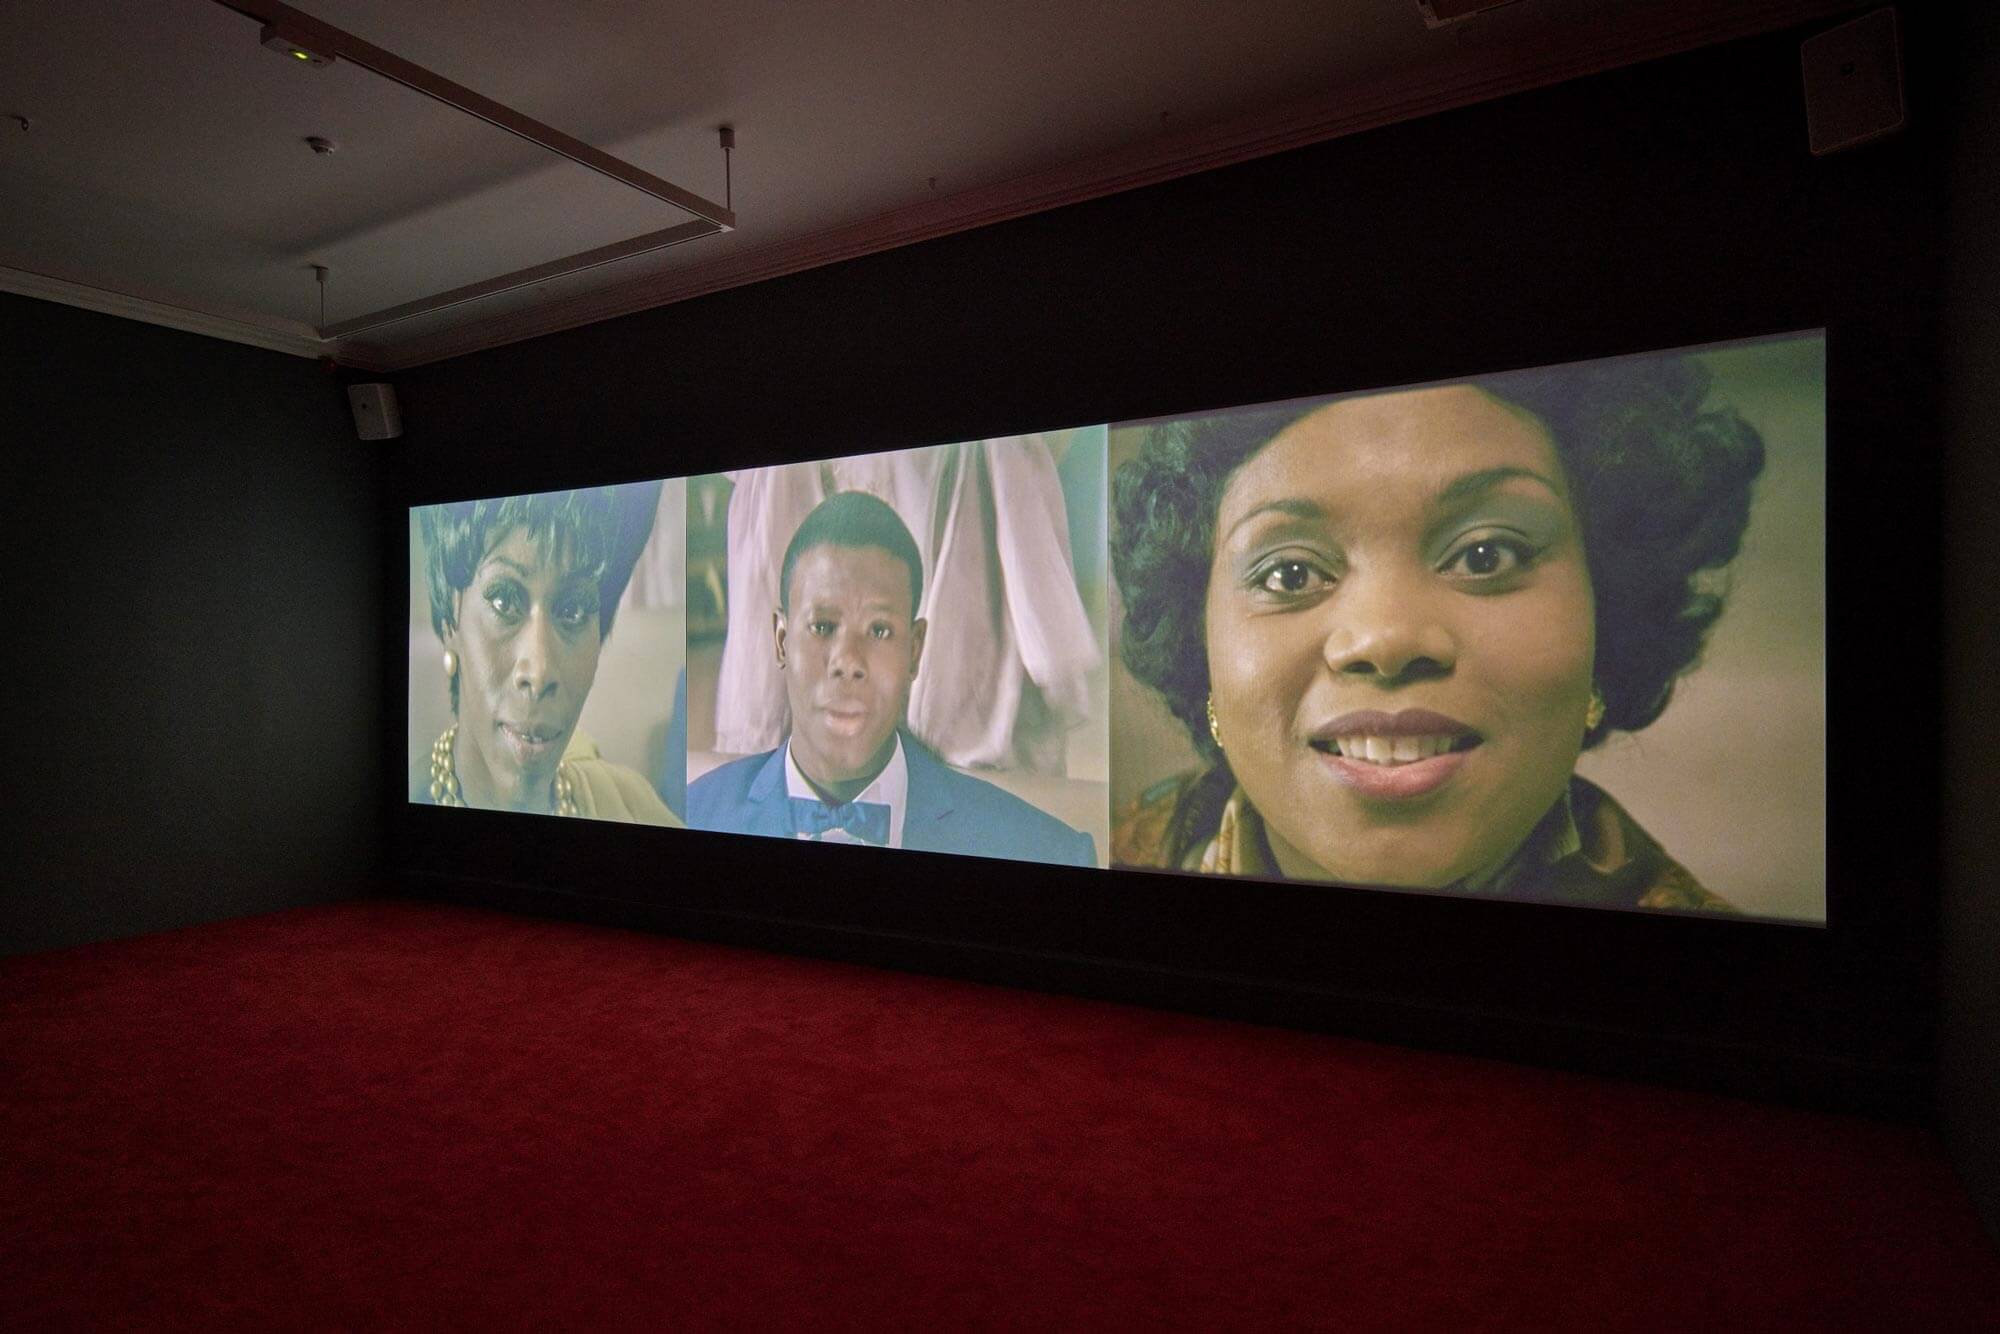 Interior photograph of a large screen showing a video installation. The screen is split into three sections, featuring a young black man and two black women